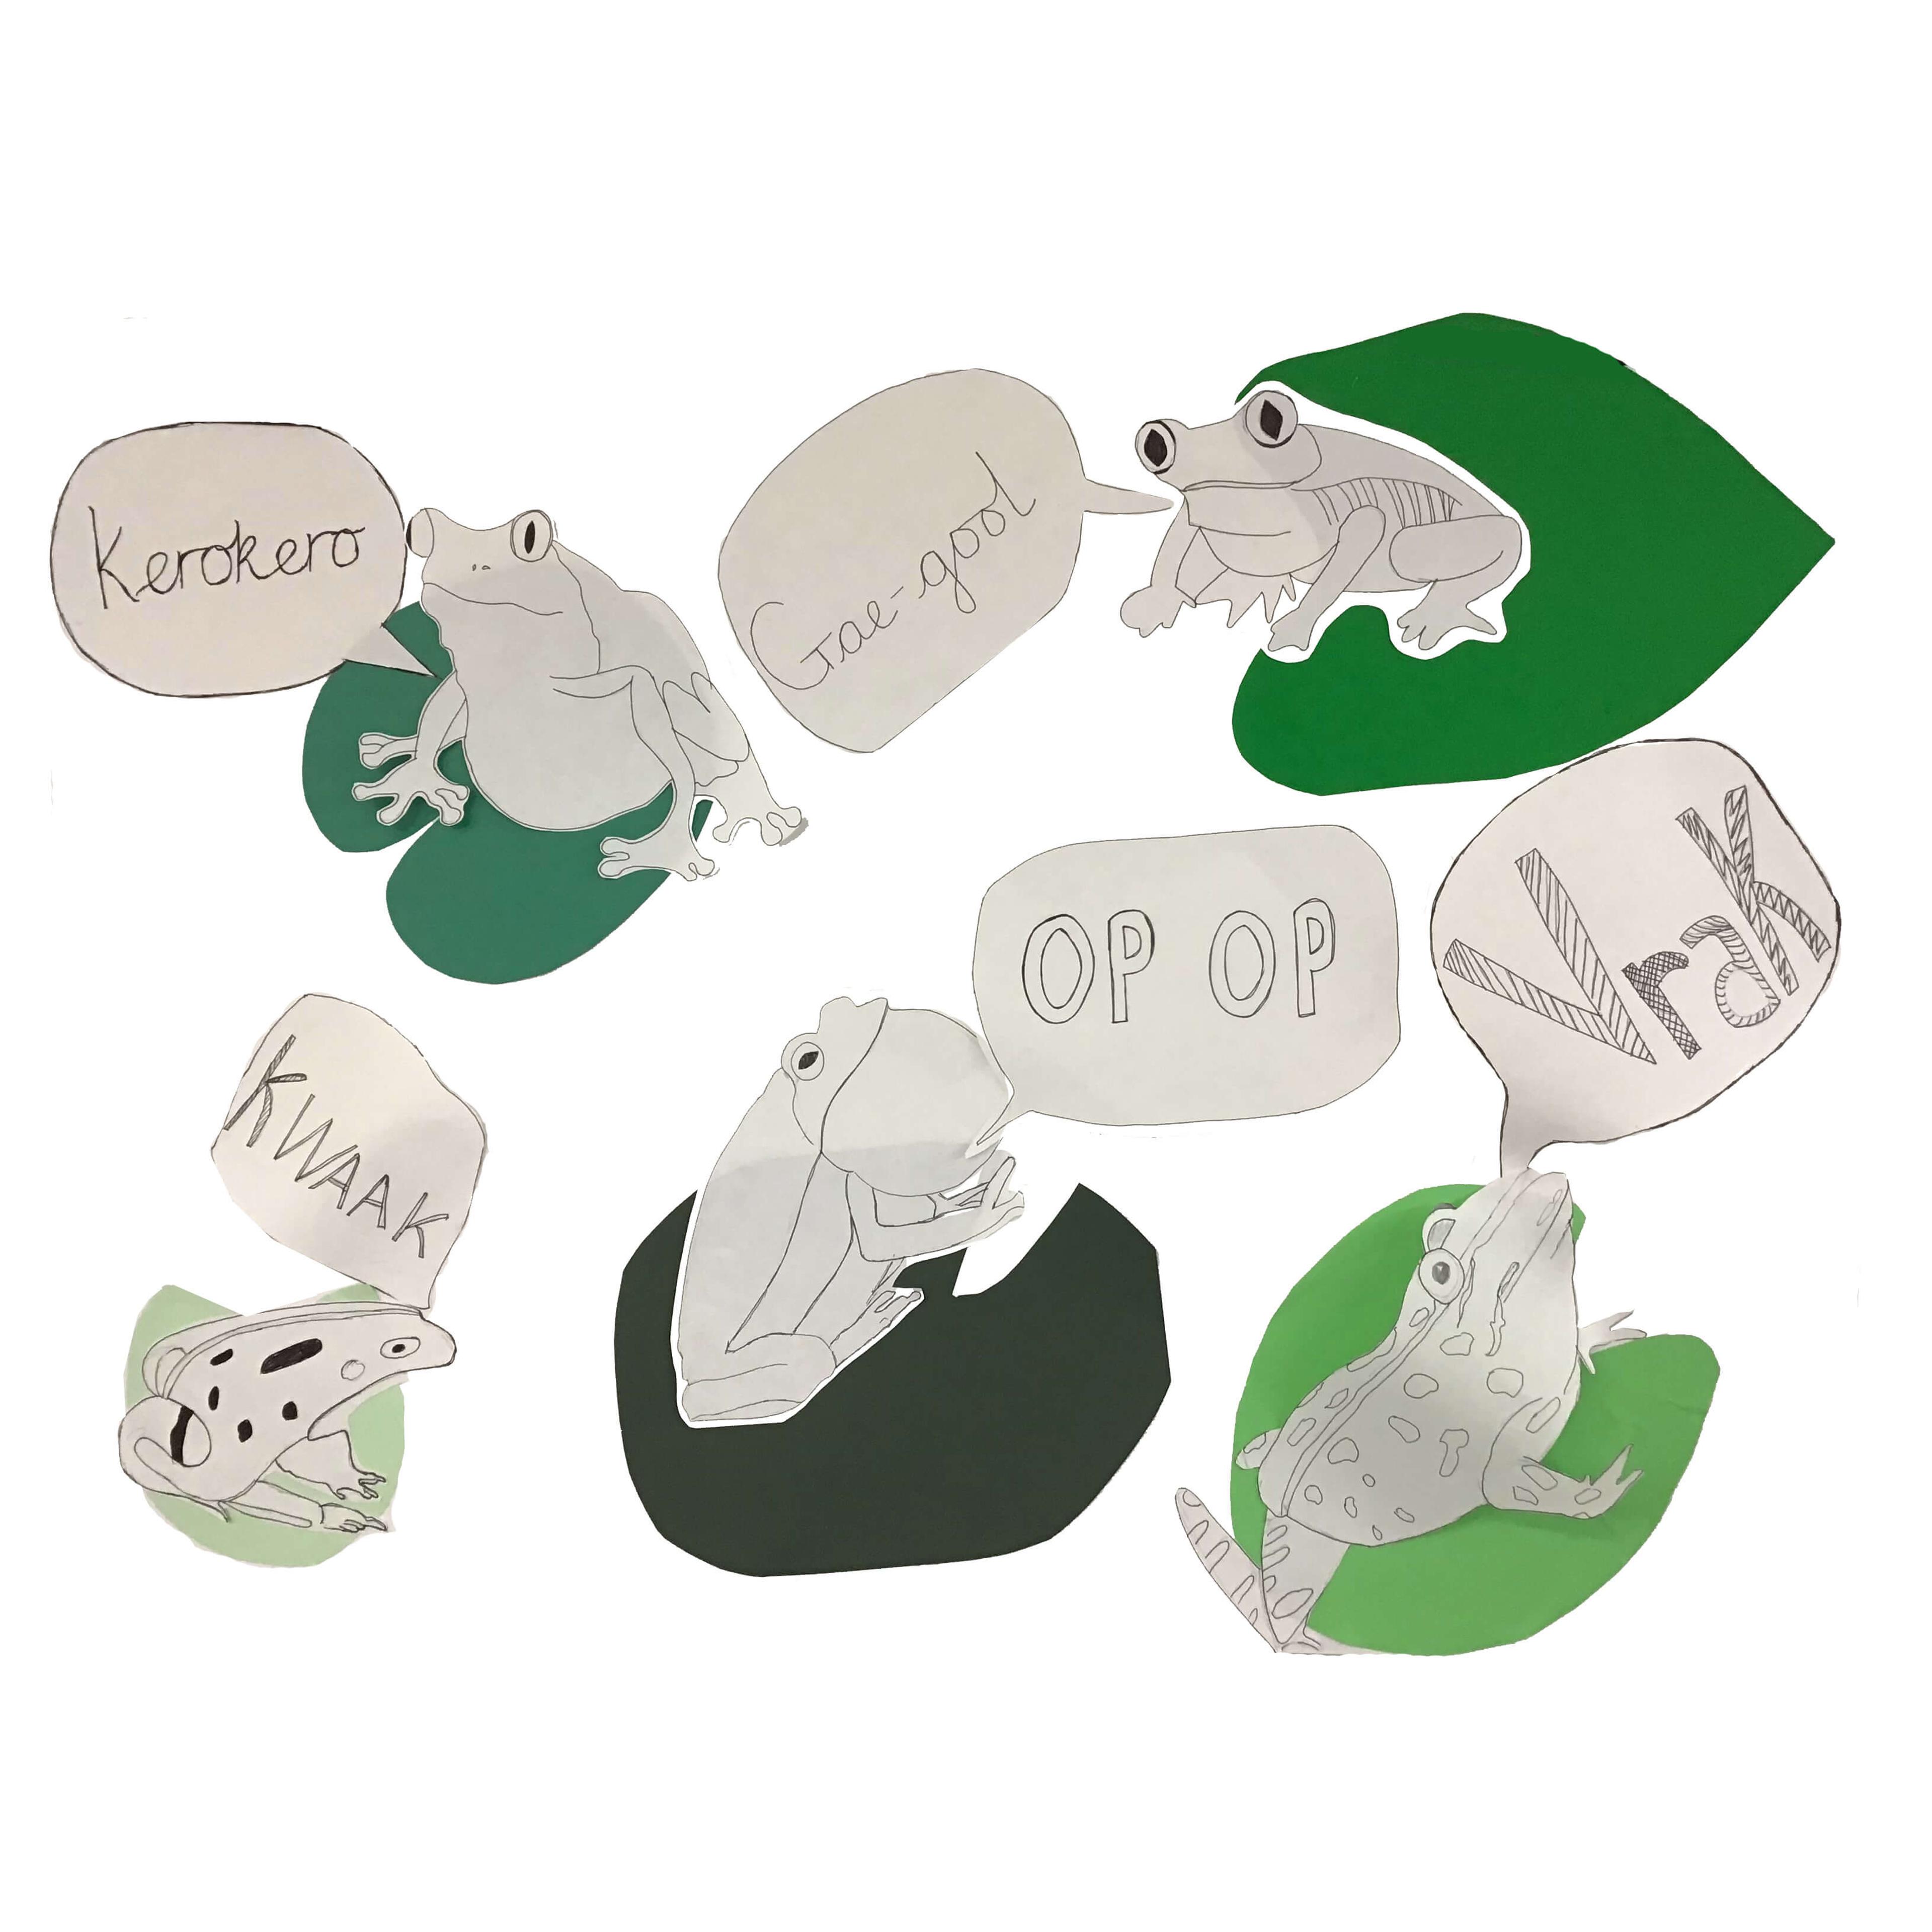 Illustrations of frogs on lillypads, each with a speech bubble with a croak sound in a different language